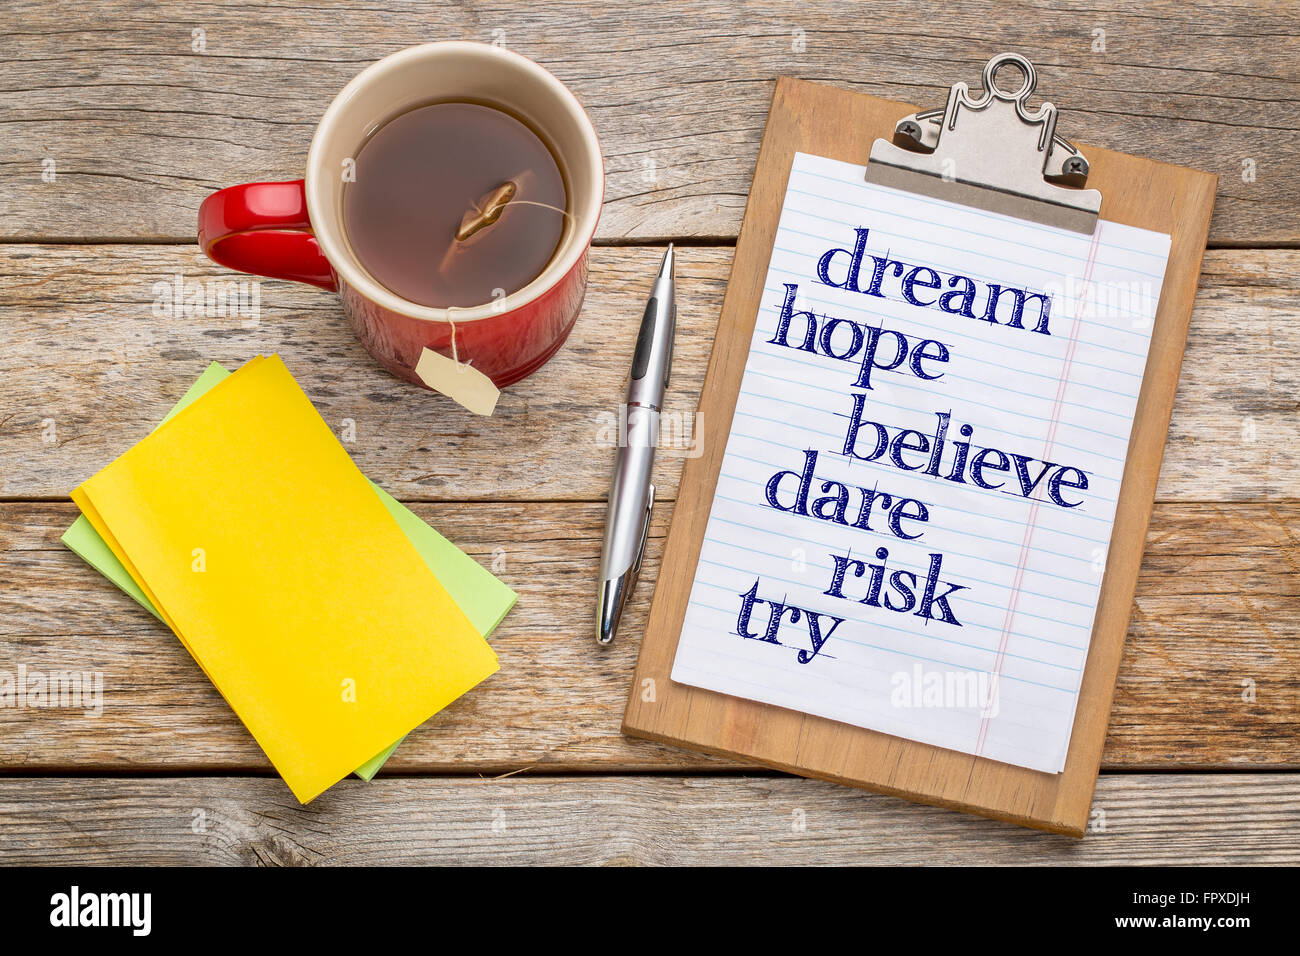 Dream, hope, believe, dare, risk and try - inspirational words on clipboard  with a pen, tea and sticky notes against rust wood  Stock Photo